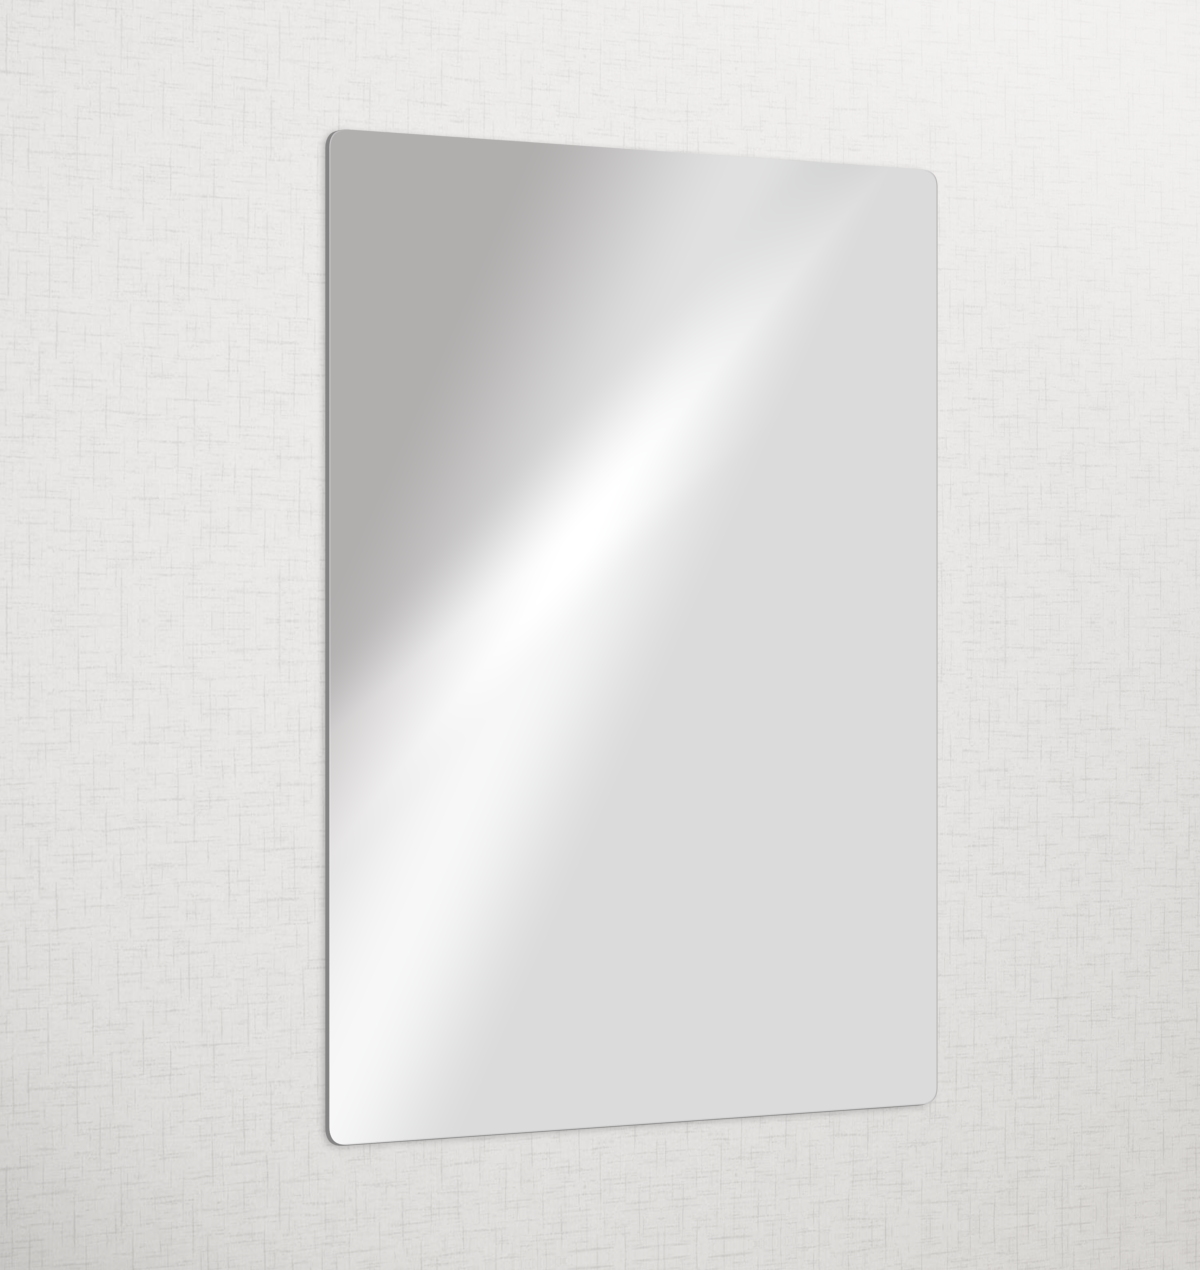 Acrylic Mirrors with Scratch Resistant Coating